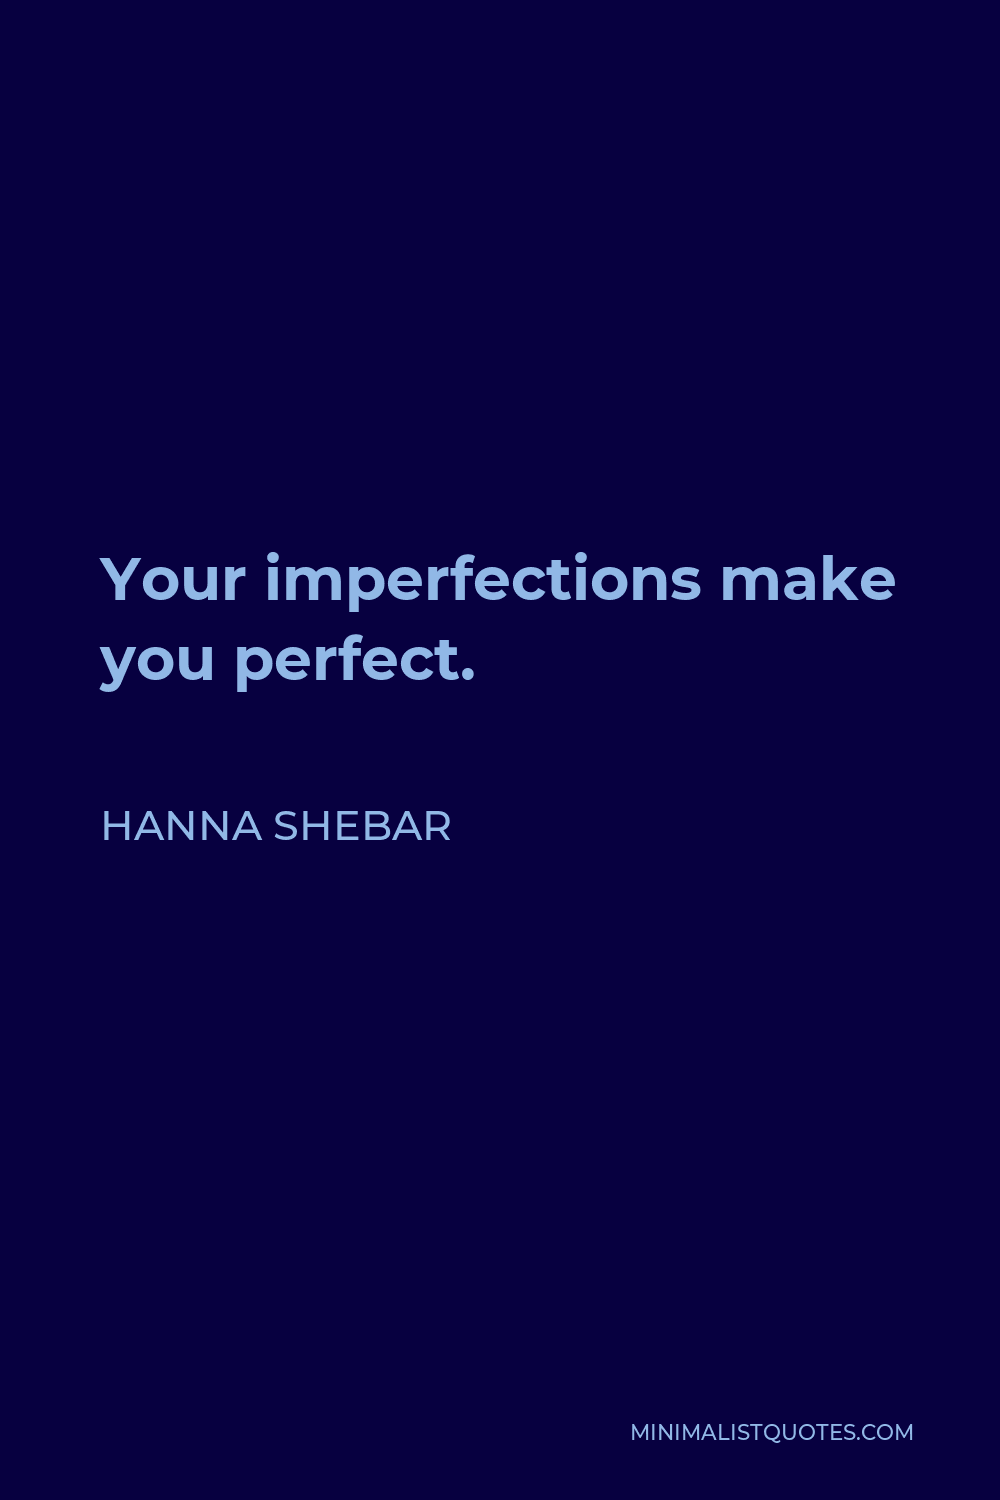 Hanna Shebar Quote - Your imperfections make you perfect.